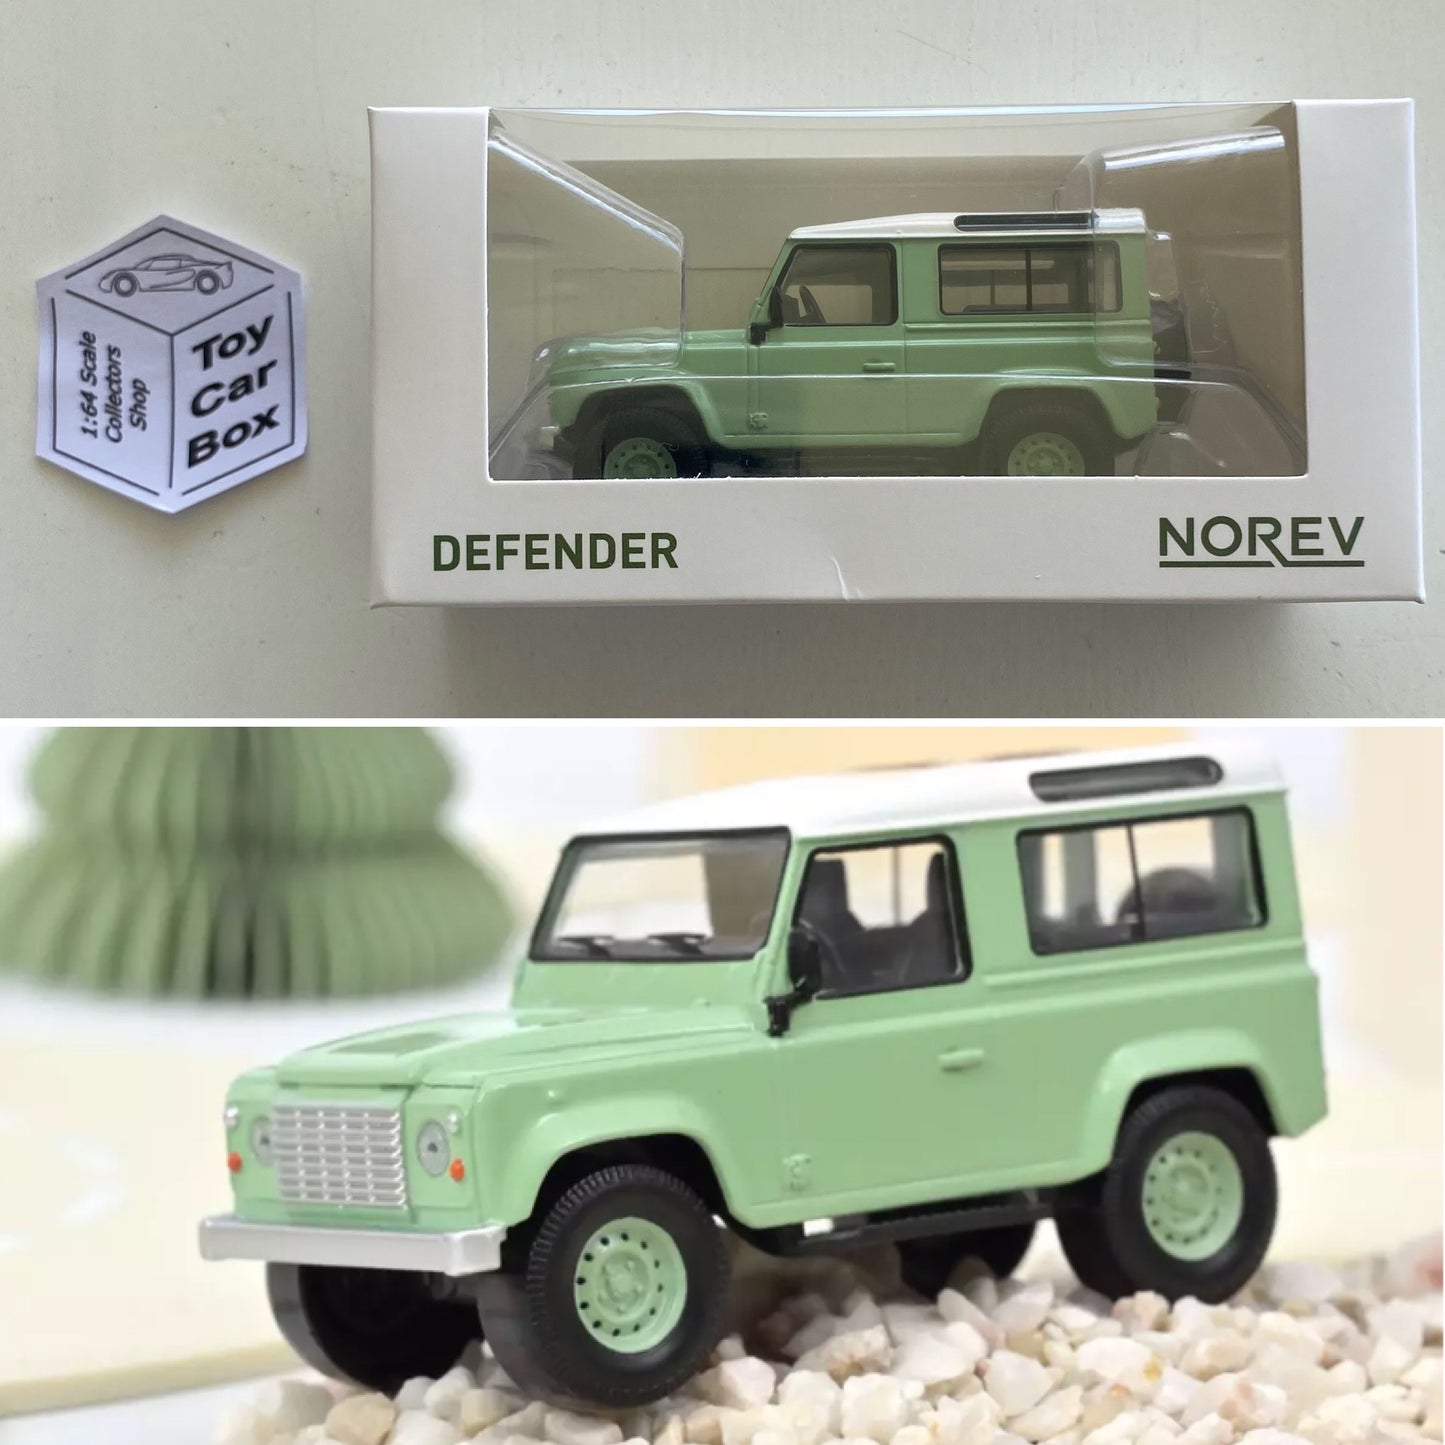 NOREV 1:43 Scale* - 1995 Land Rover Defender 90 (Green - Boxed Jet Car) O31g